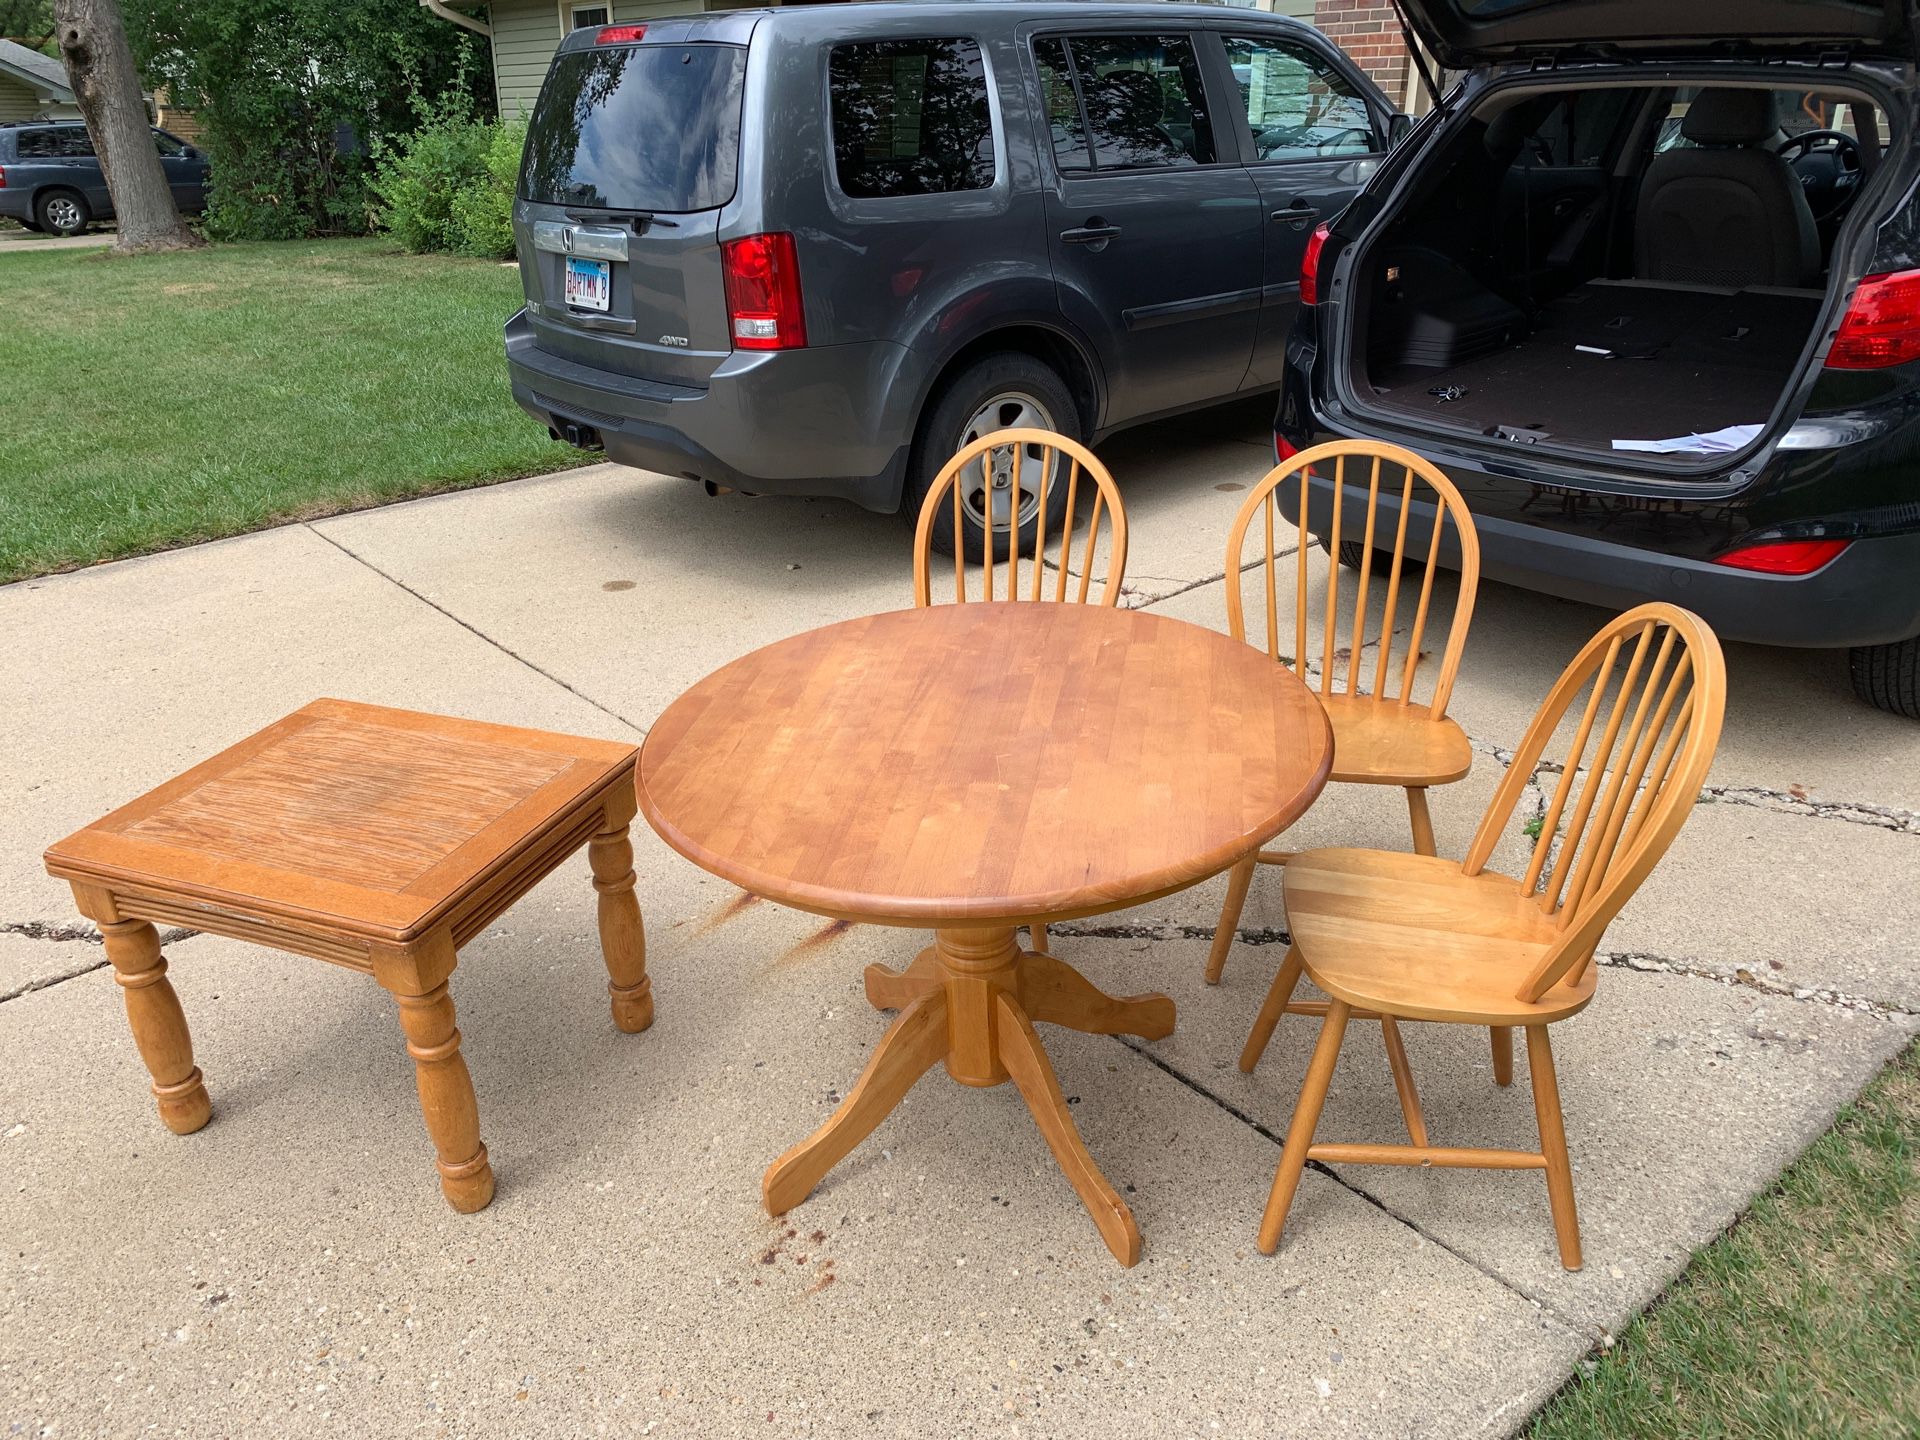 Wooden breakfast table set and coffee table